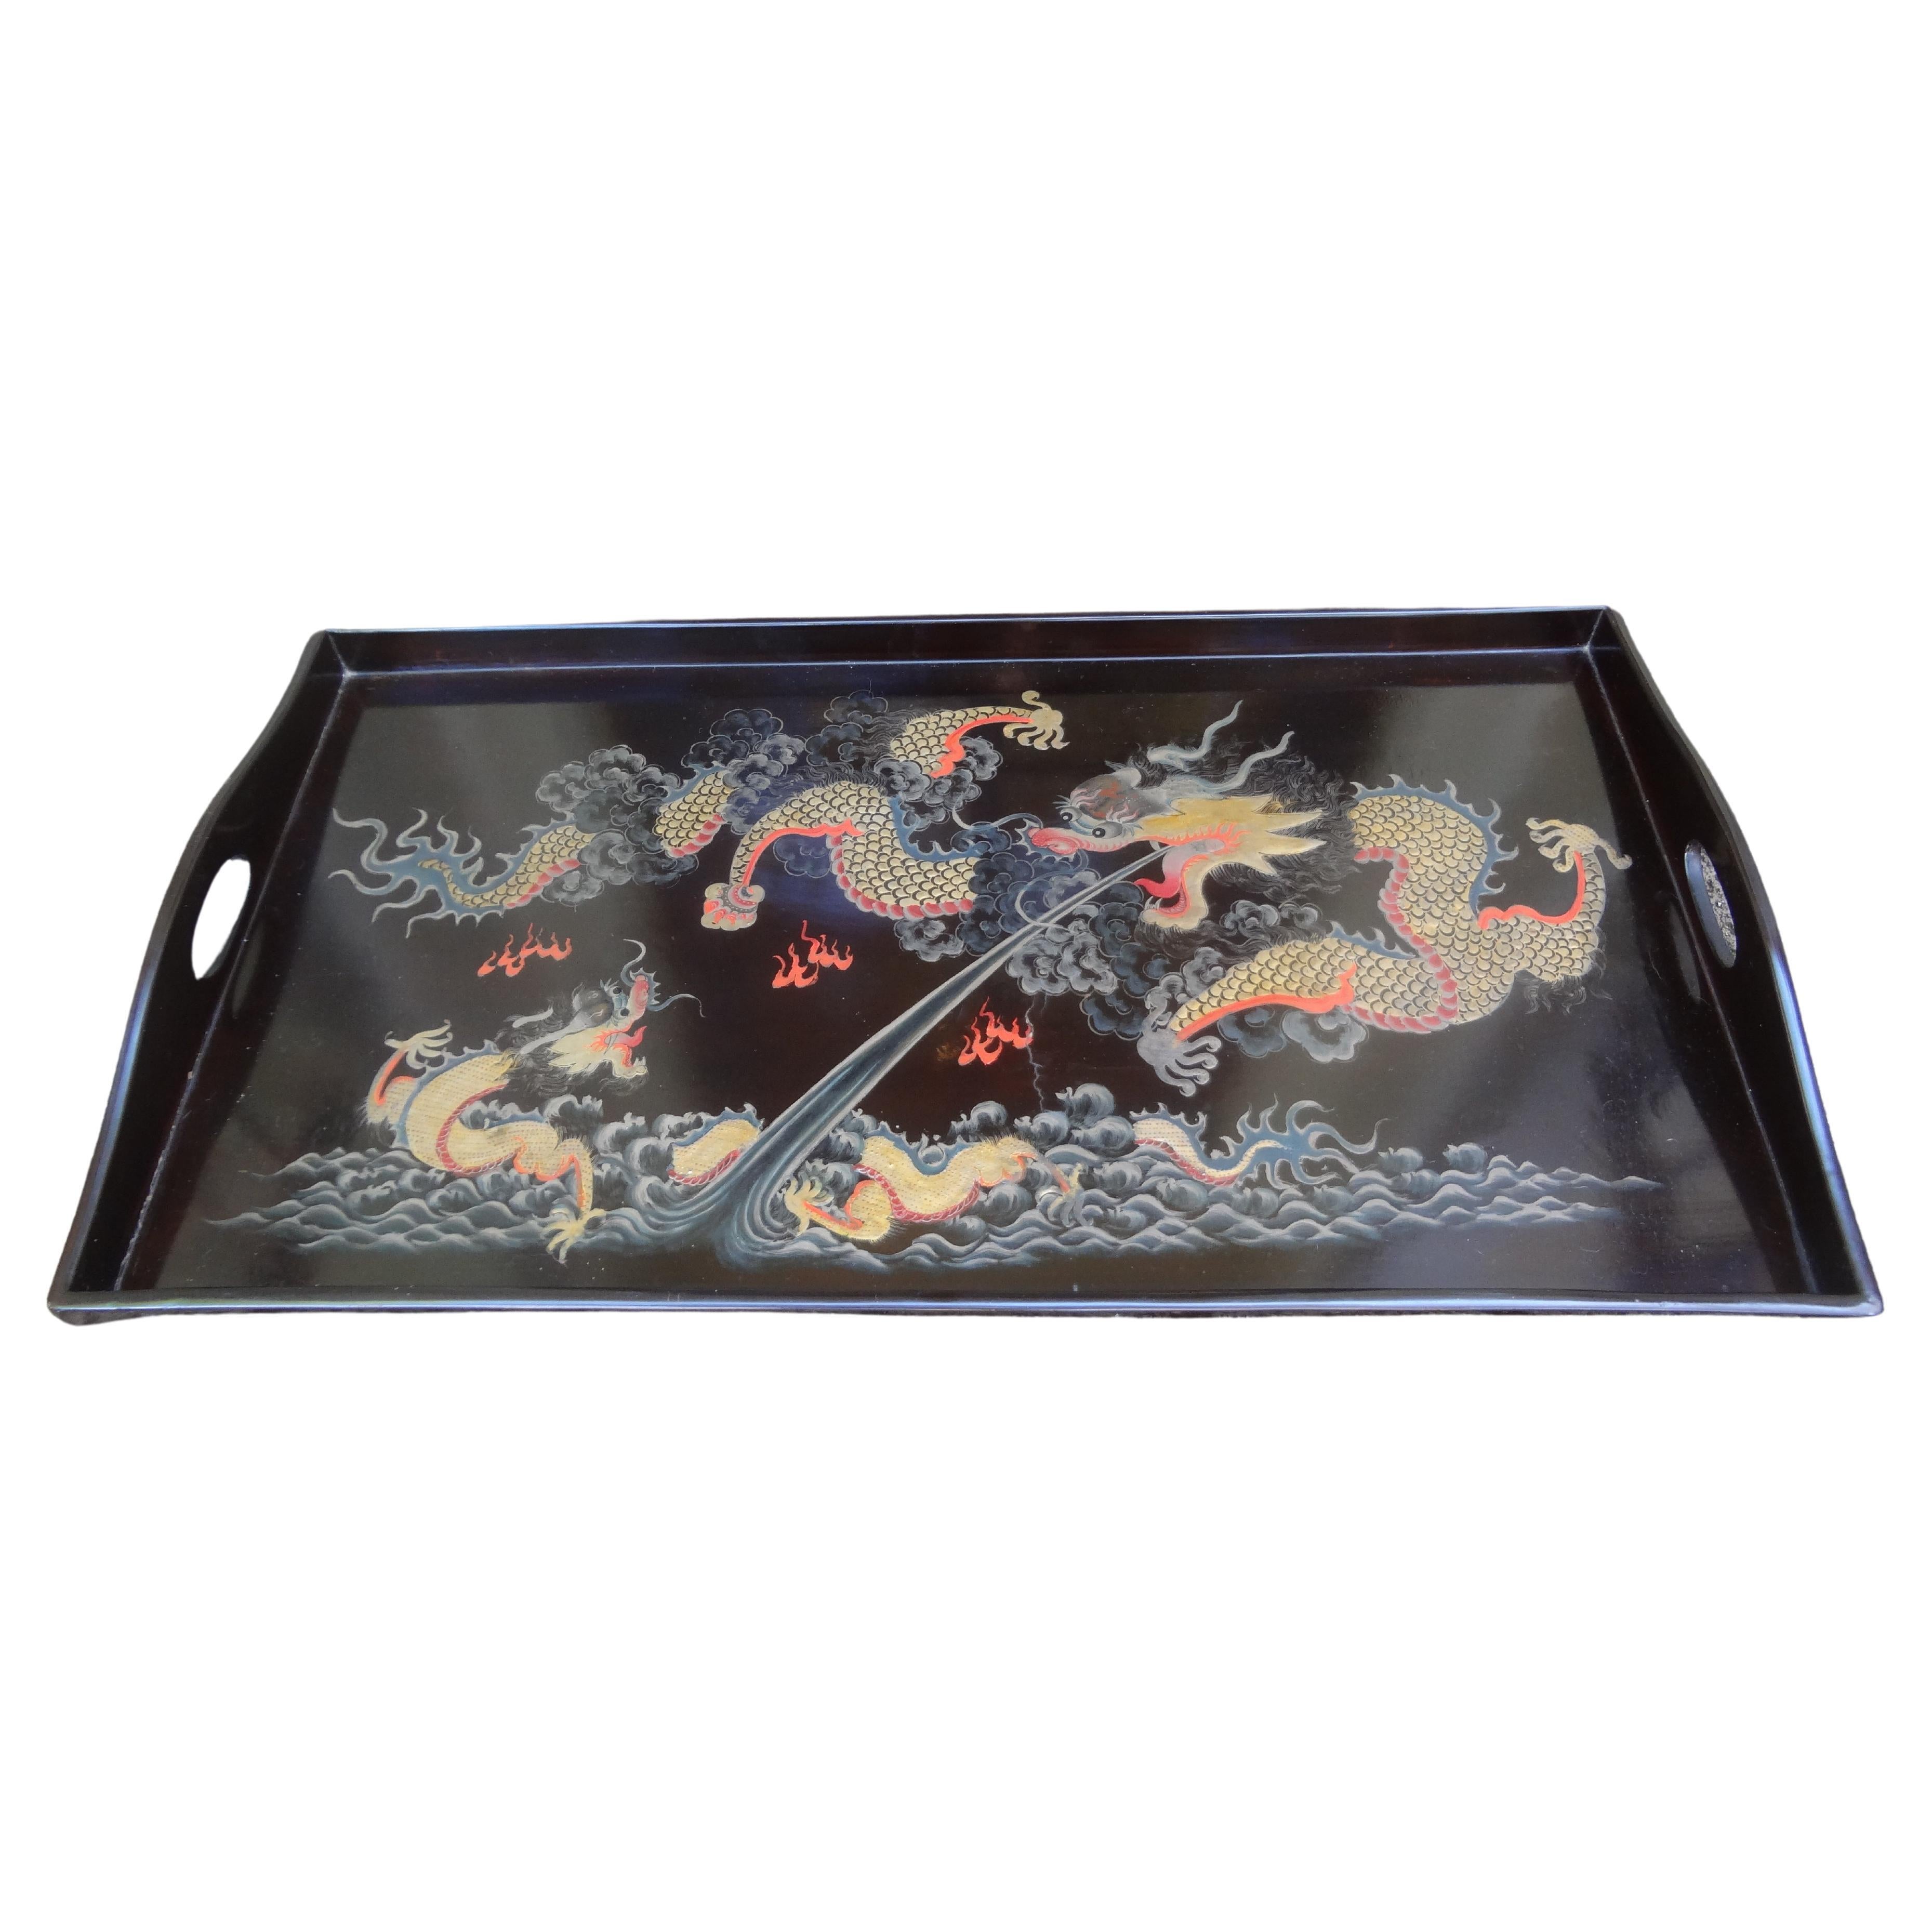 Antique Chinese Lacquer Tray With Dragons For Sale 4